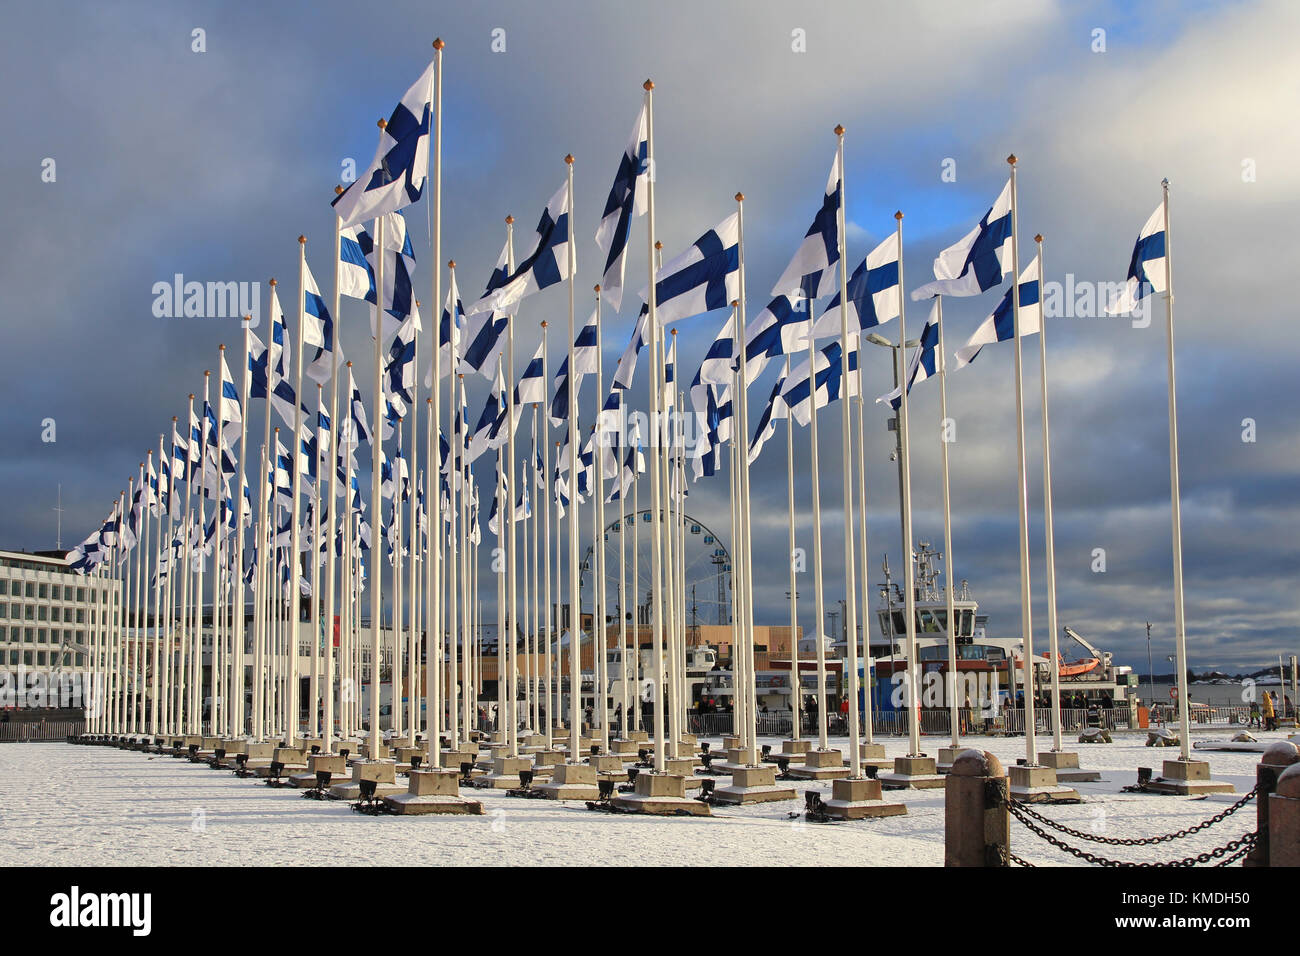 HELSINKI, FINLAND - DECEMBER 6, 2017: 100 flags of Finland on the Helsinki Market Square to celebrate 100-years-old Finland. Stock Photo